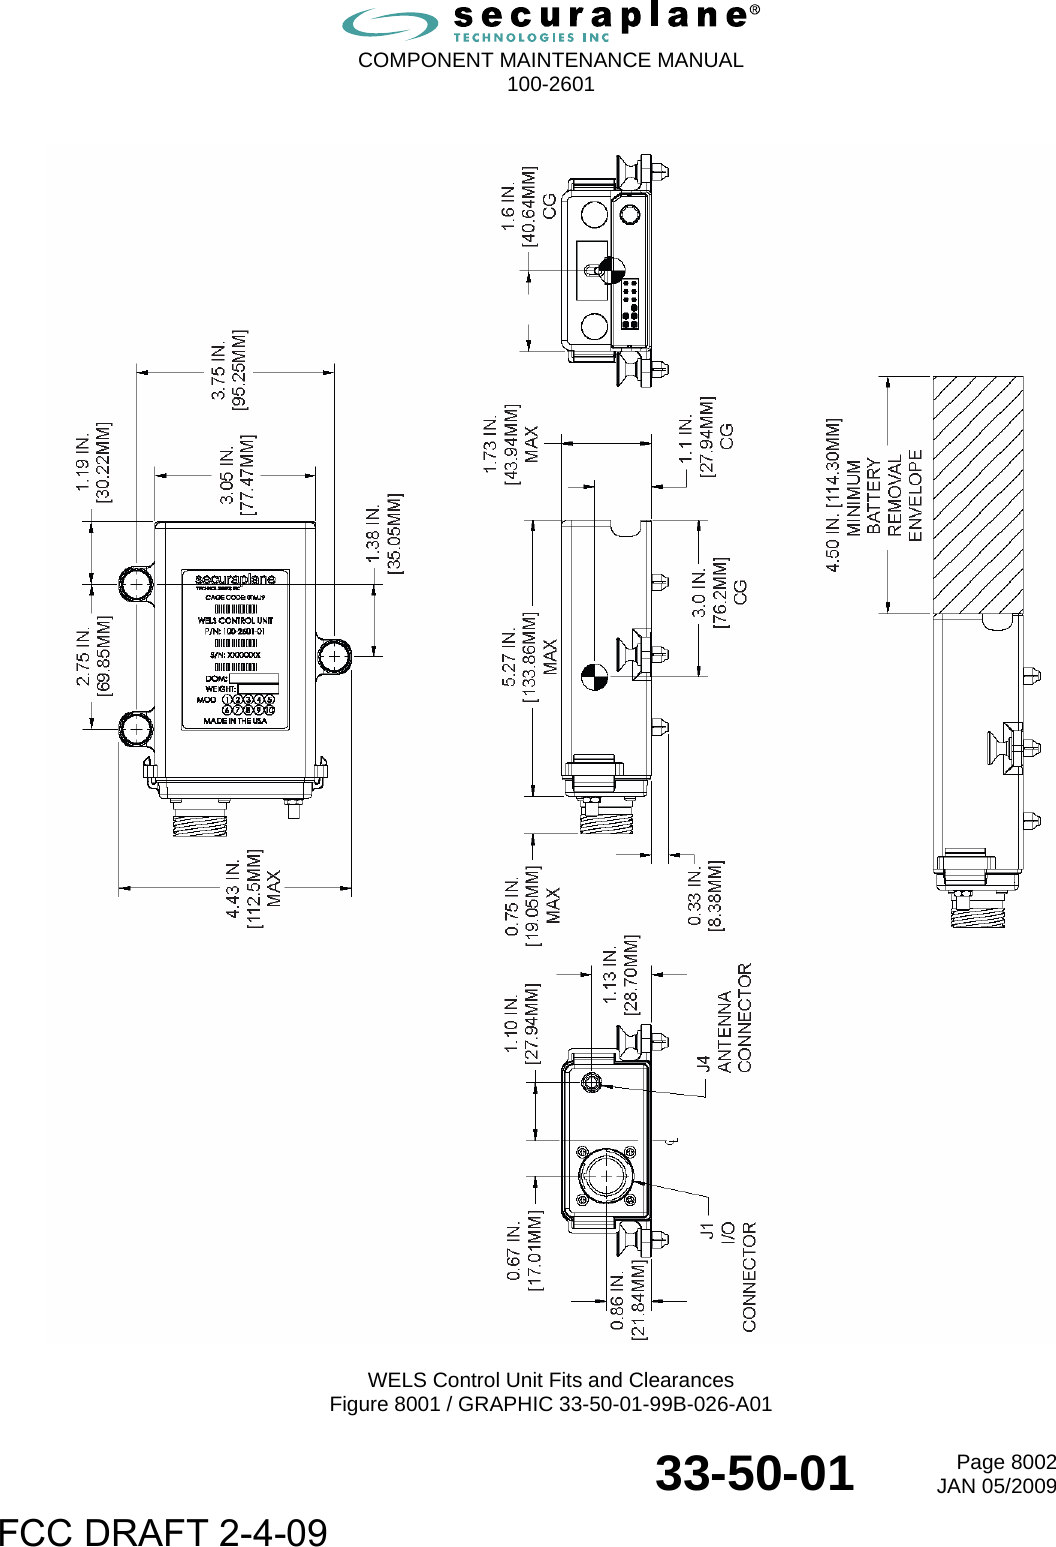  COMPONENT MAINTENANCE MANUAL  100-2601  33-50-01  Page 8002JAN 05/2009    WELS Control Unit Fits and Clearances Figure 8001 / GRAPHIC 33-50-01-99B-026-A01 FCC DRAFT 2-4-09